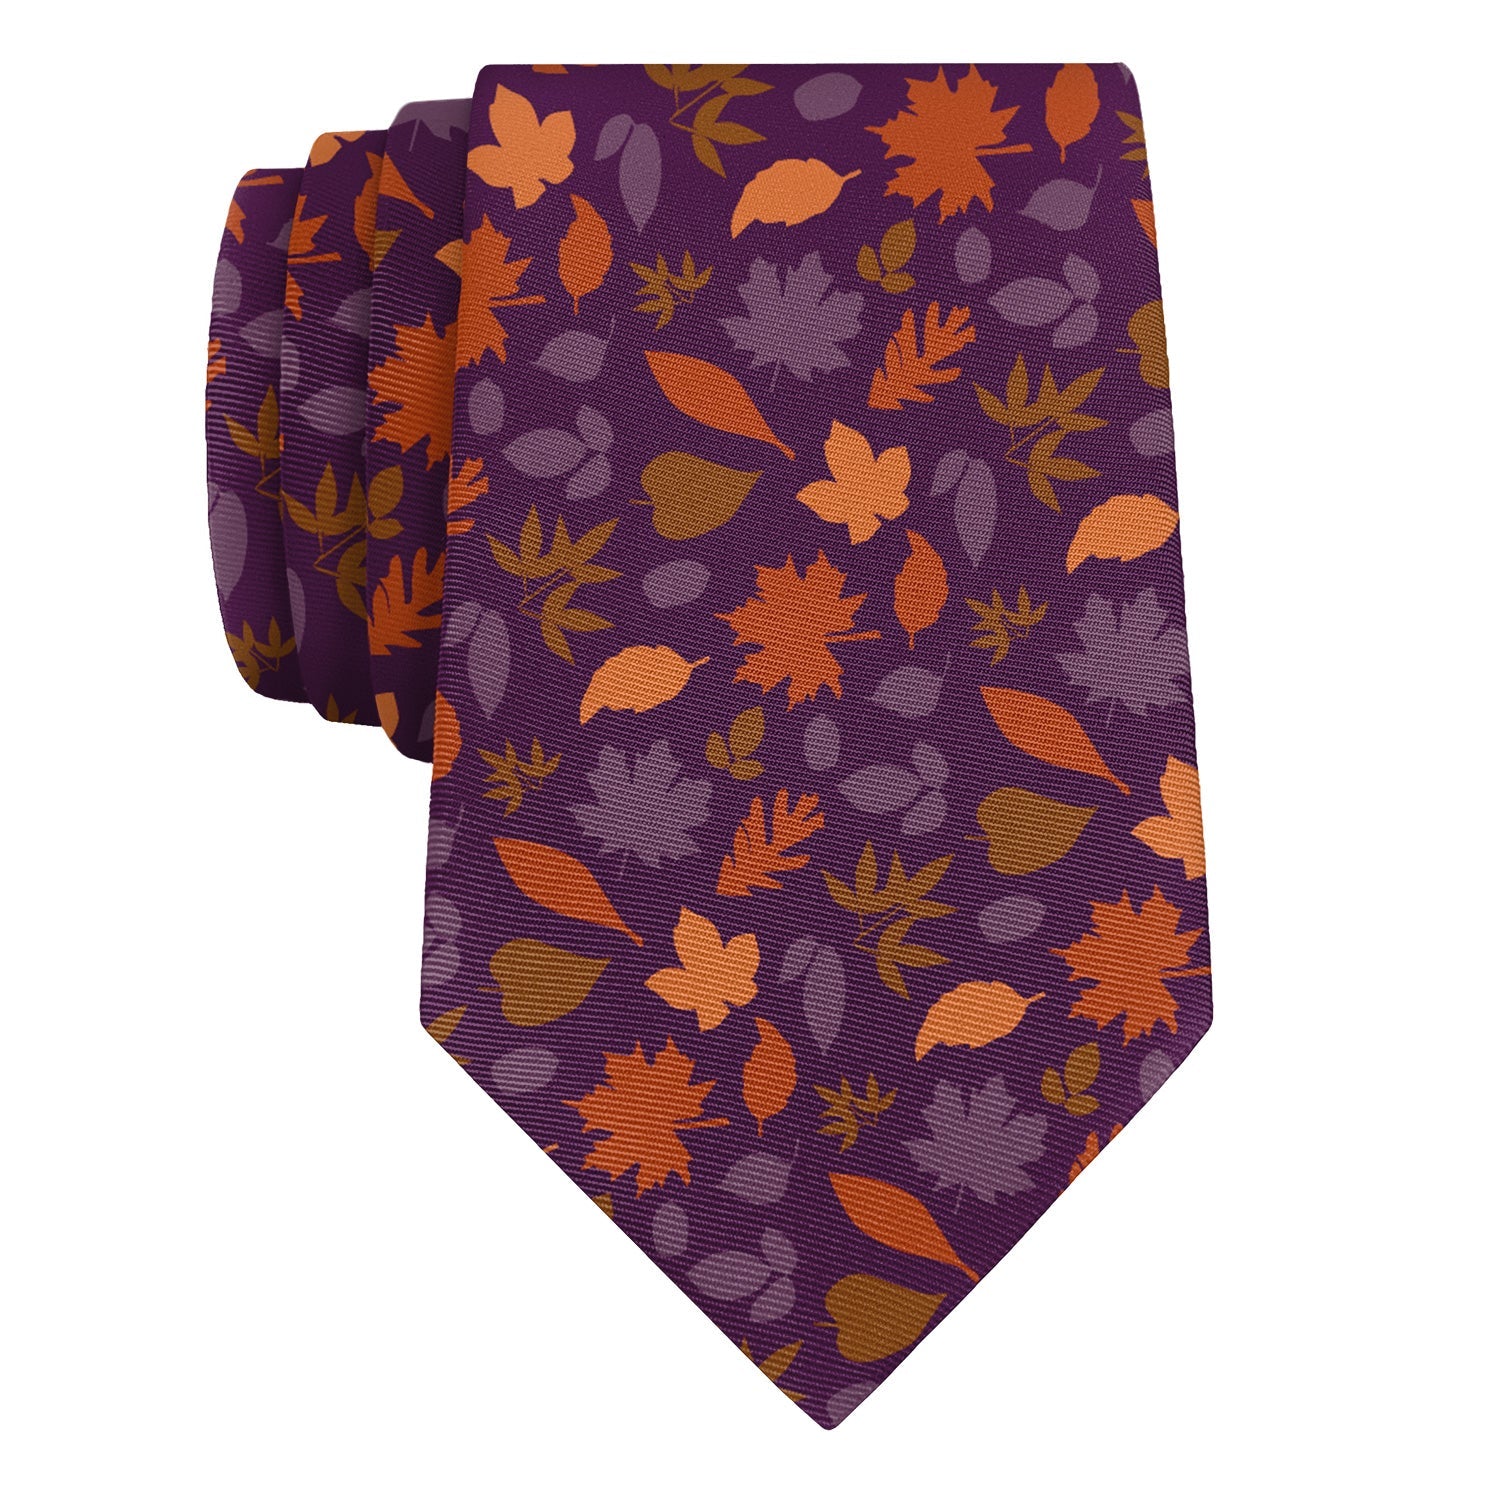 Autumn Leaves Necktie - Rolled - Knotty Tie Co.